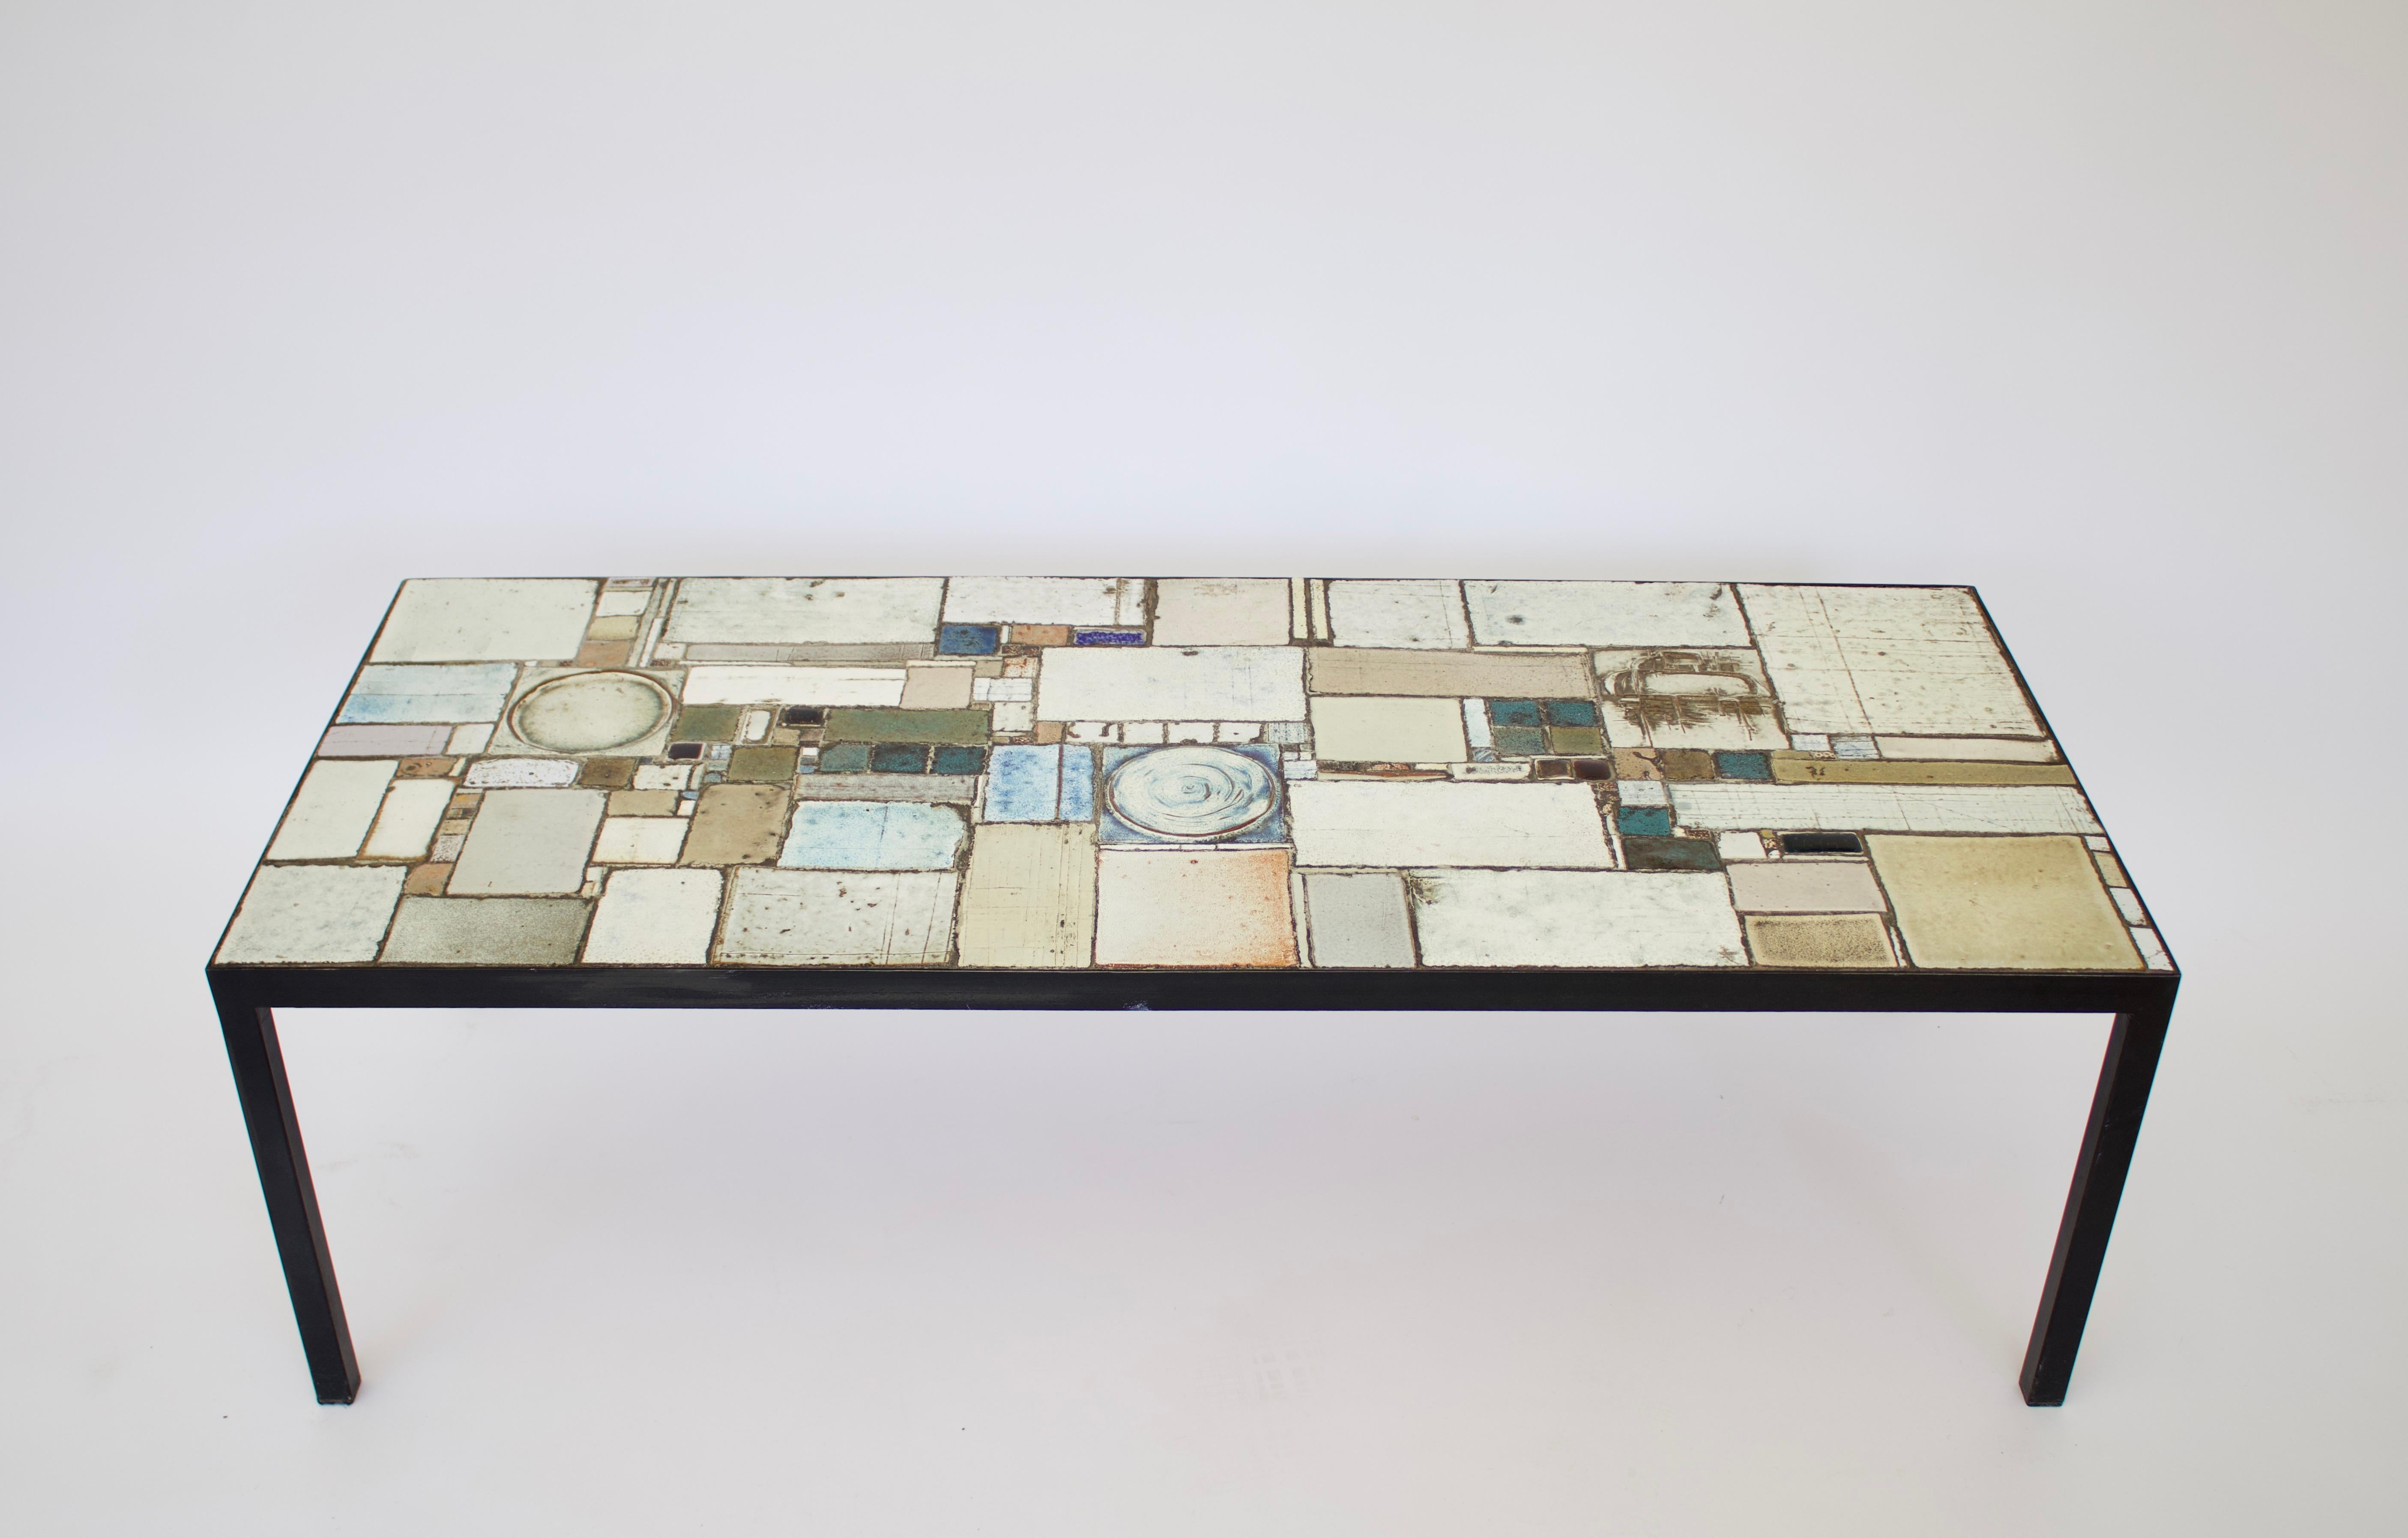 Pia Manu signed ceramic mosaic coffee table. Pia Manu, a Belgian artist often collaborated with Amphora ceramic company who created ceramic tiles for his creations. 
Belgian sculptor and designer, Pia Manu Is related to Flemish brutalists. He